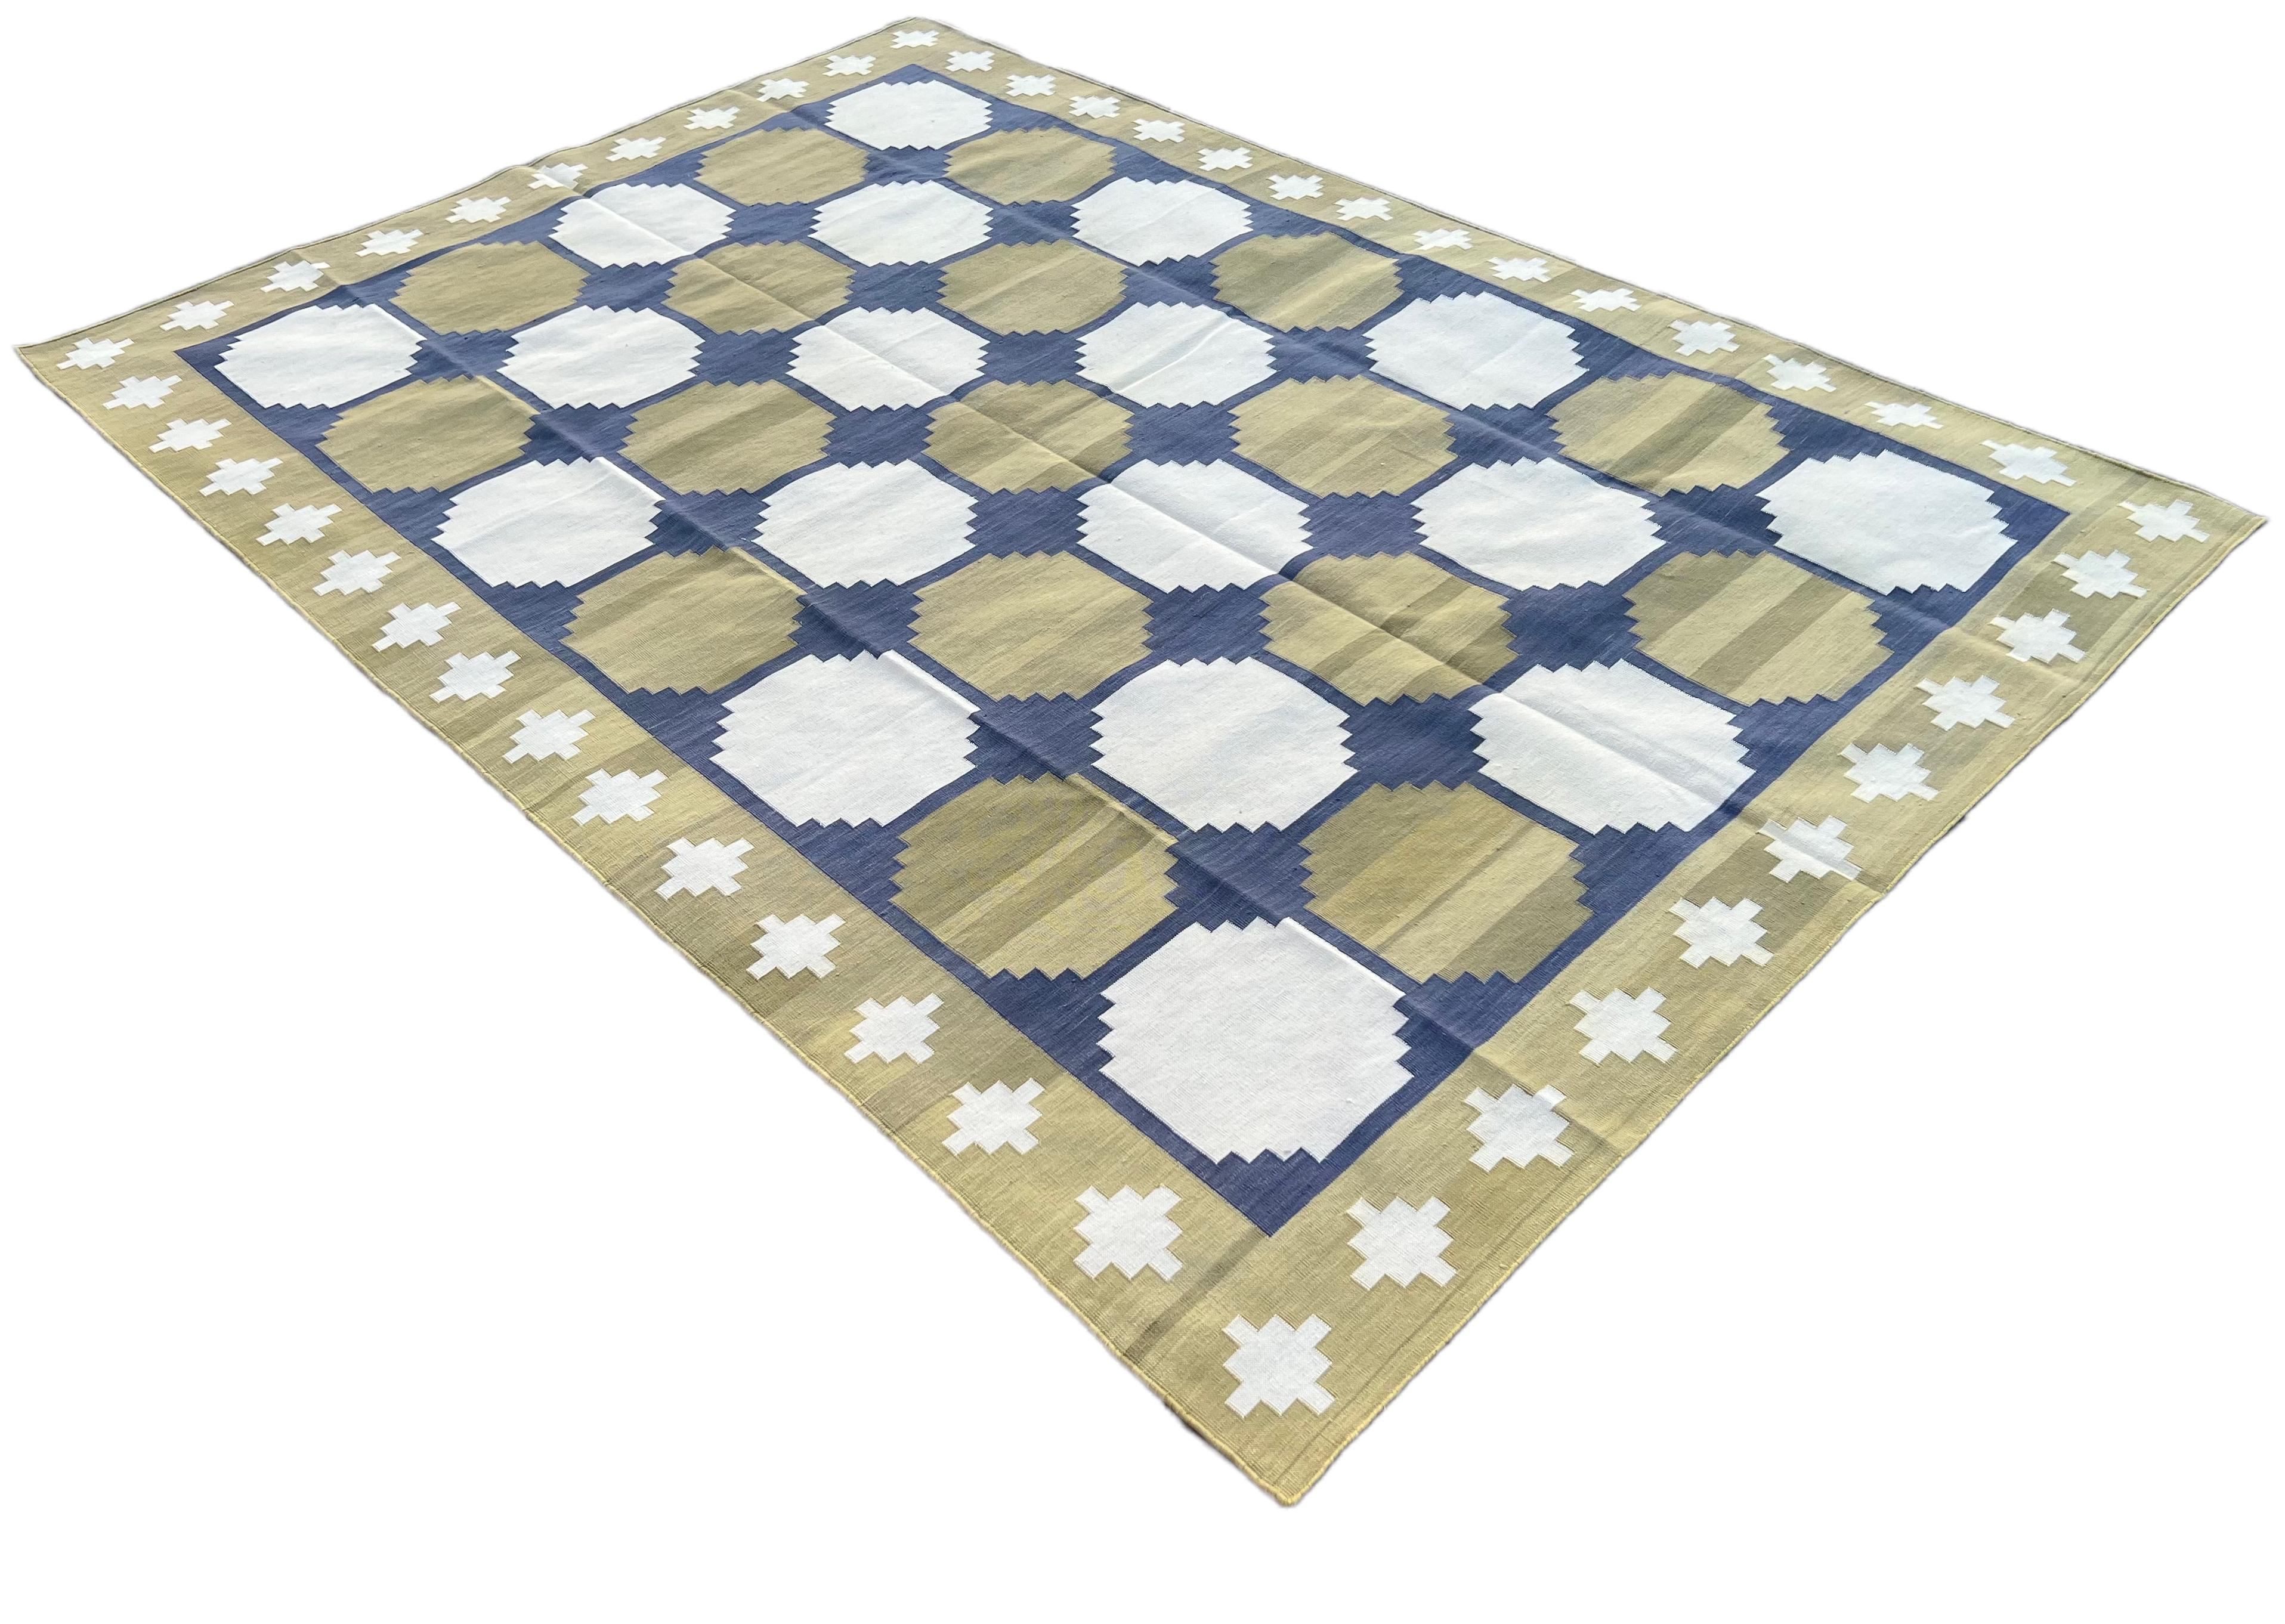 Hand-Woven Handmade Cotton Area Flat Weave Rug, 6x9 Green And Blue Geometric Indian Dhurrie For Sale